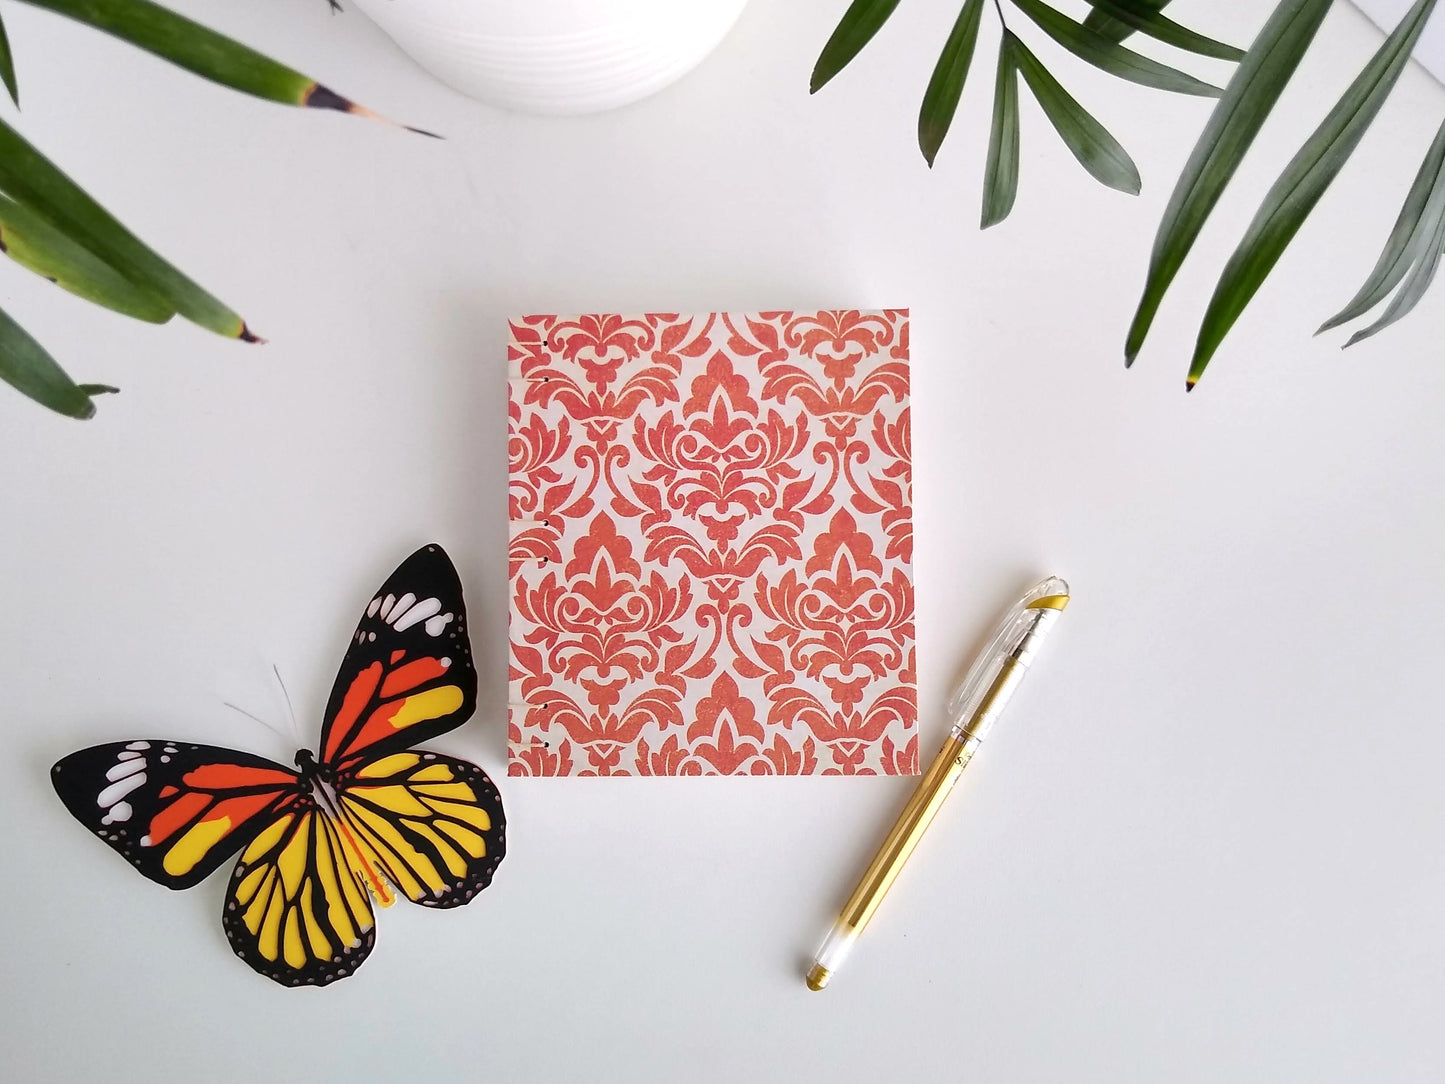 A handmade journal lays on a white desk beside a potted plant, a gold pen, and a paper butterfly. The cover of the journal is cream with an orange damask pattern printed across it.